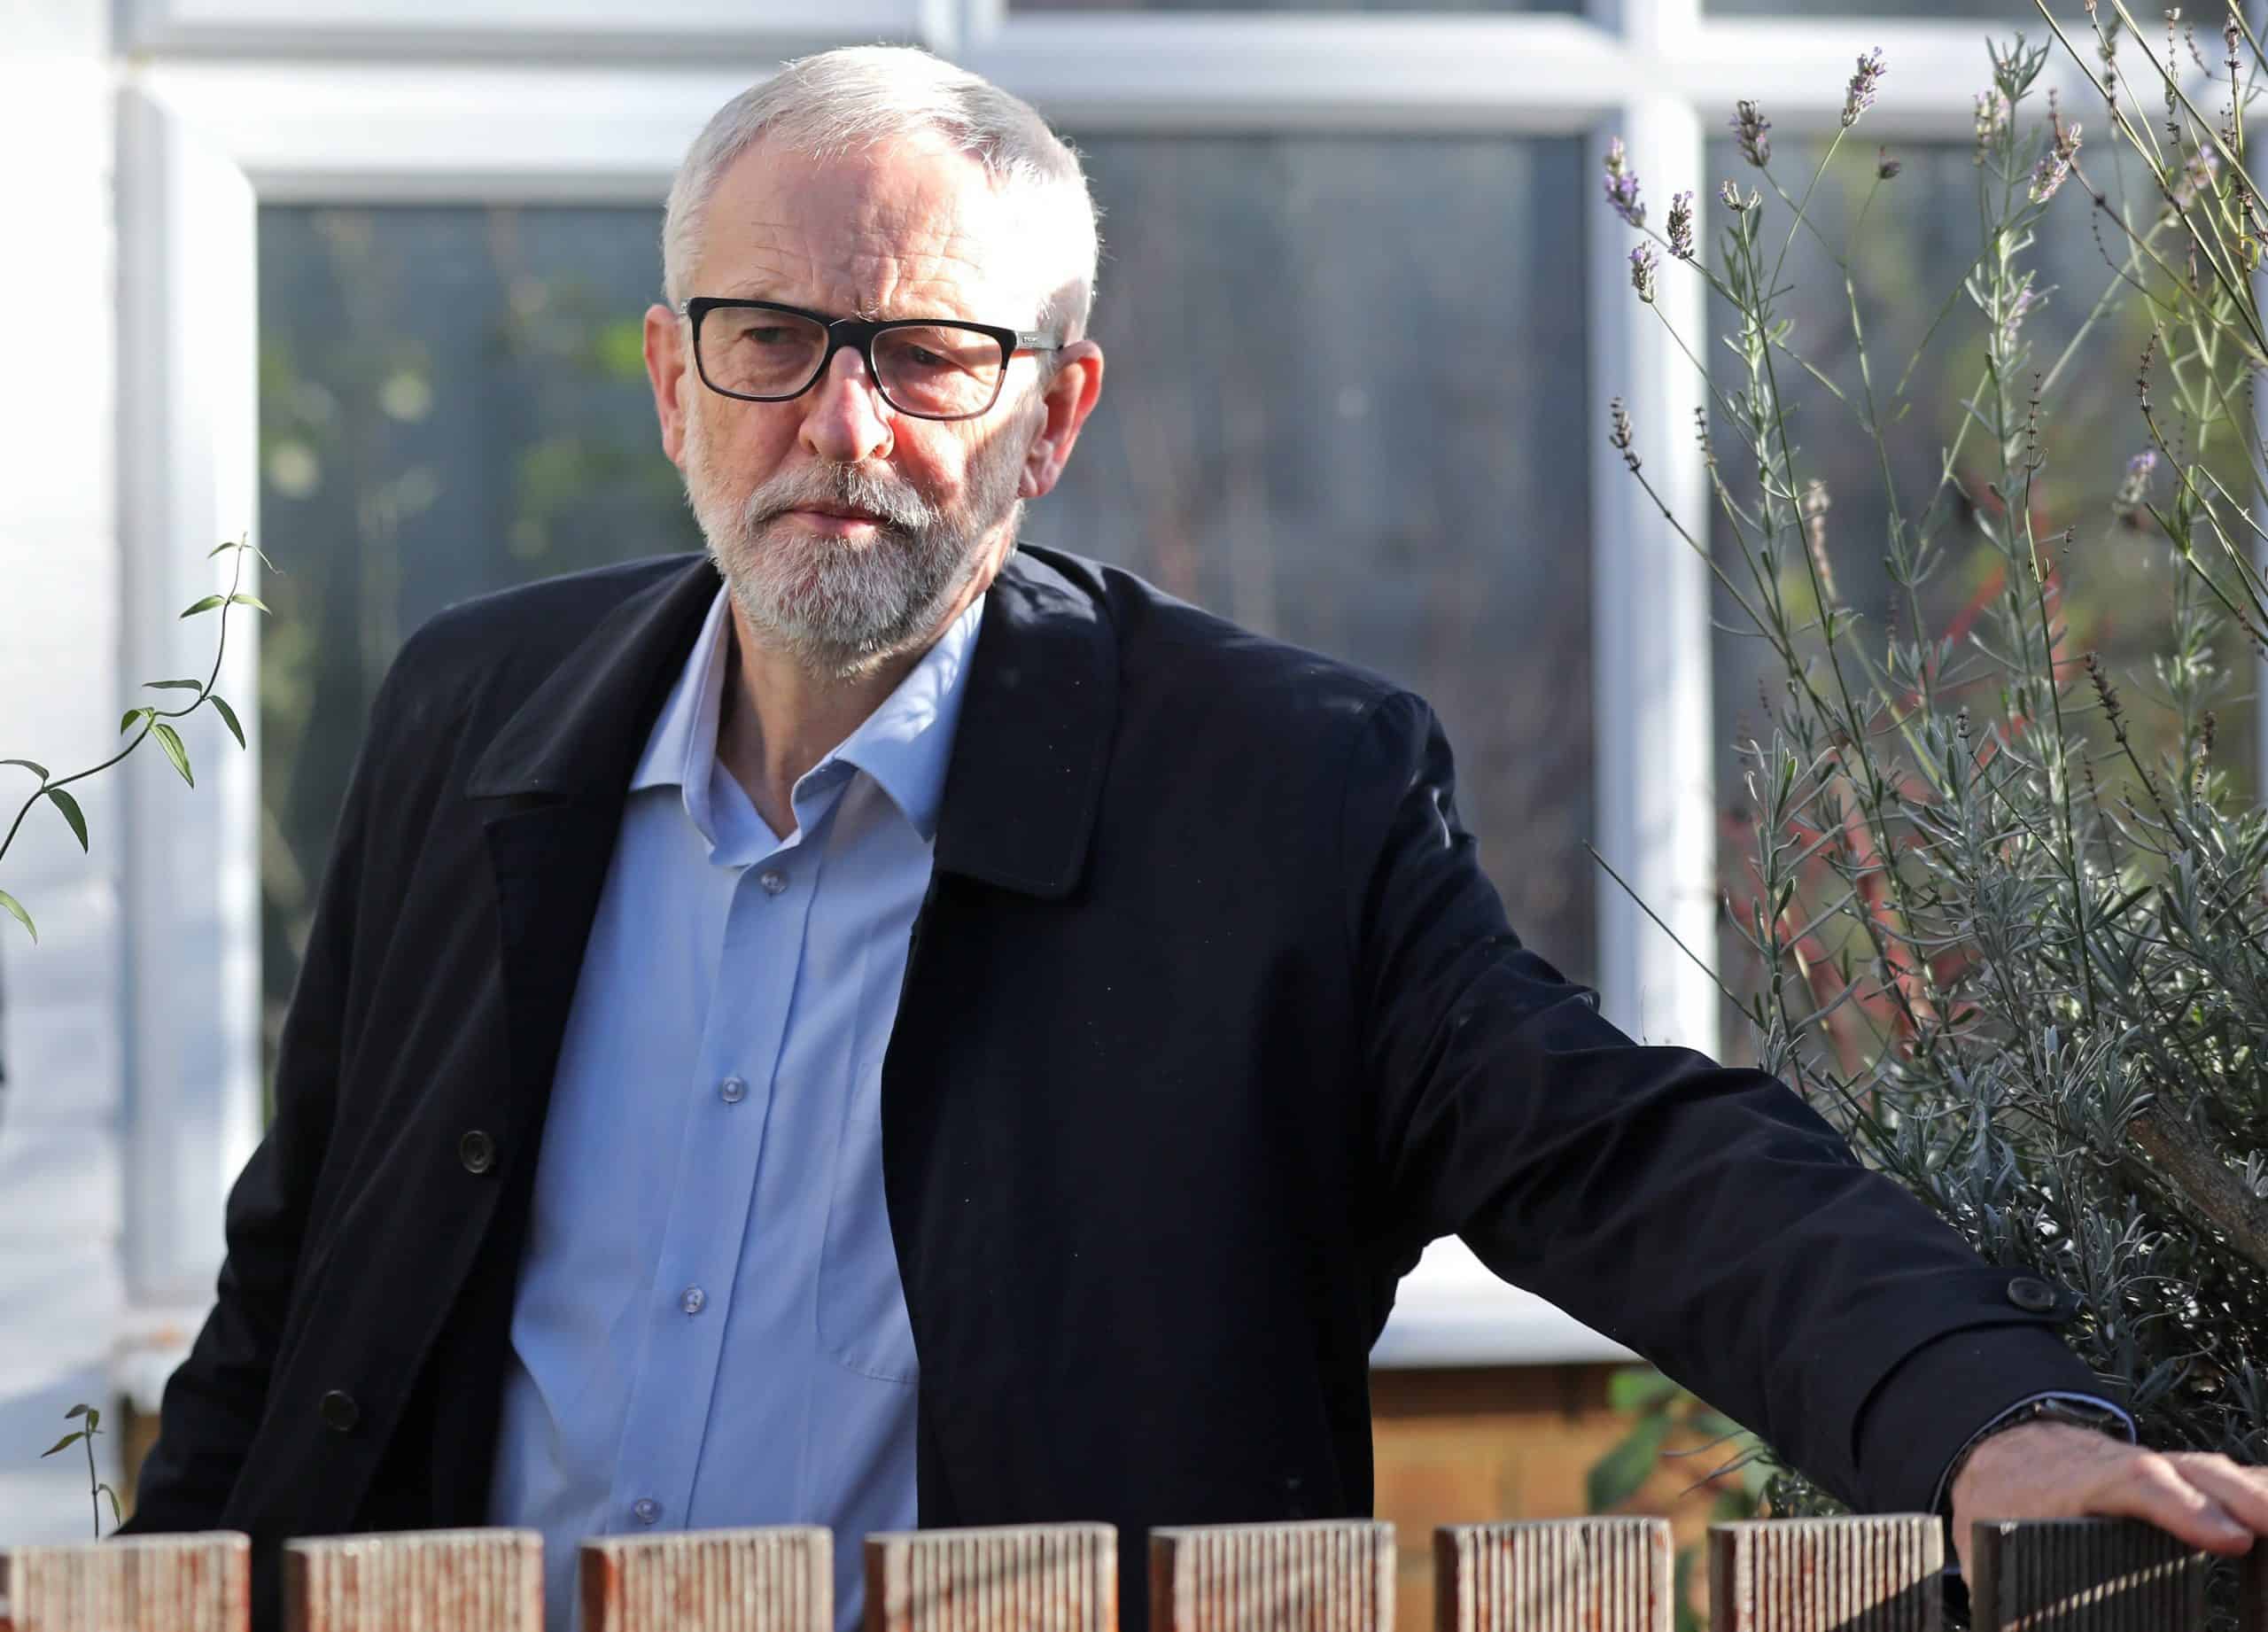 Corbyn: Labour ‘opponents’ and media ‘dramatically overstated’ antisemitism crisis